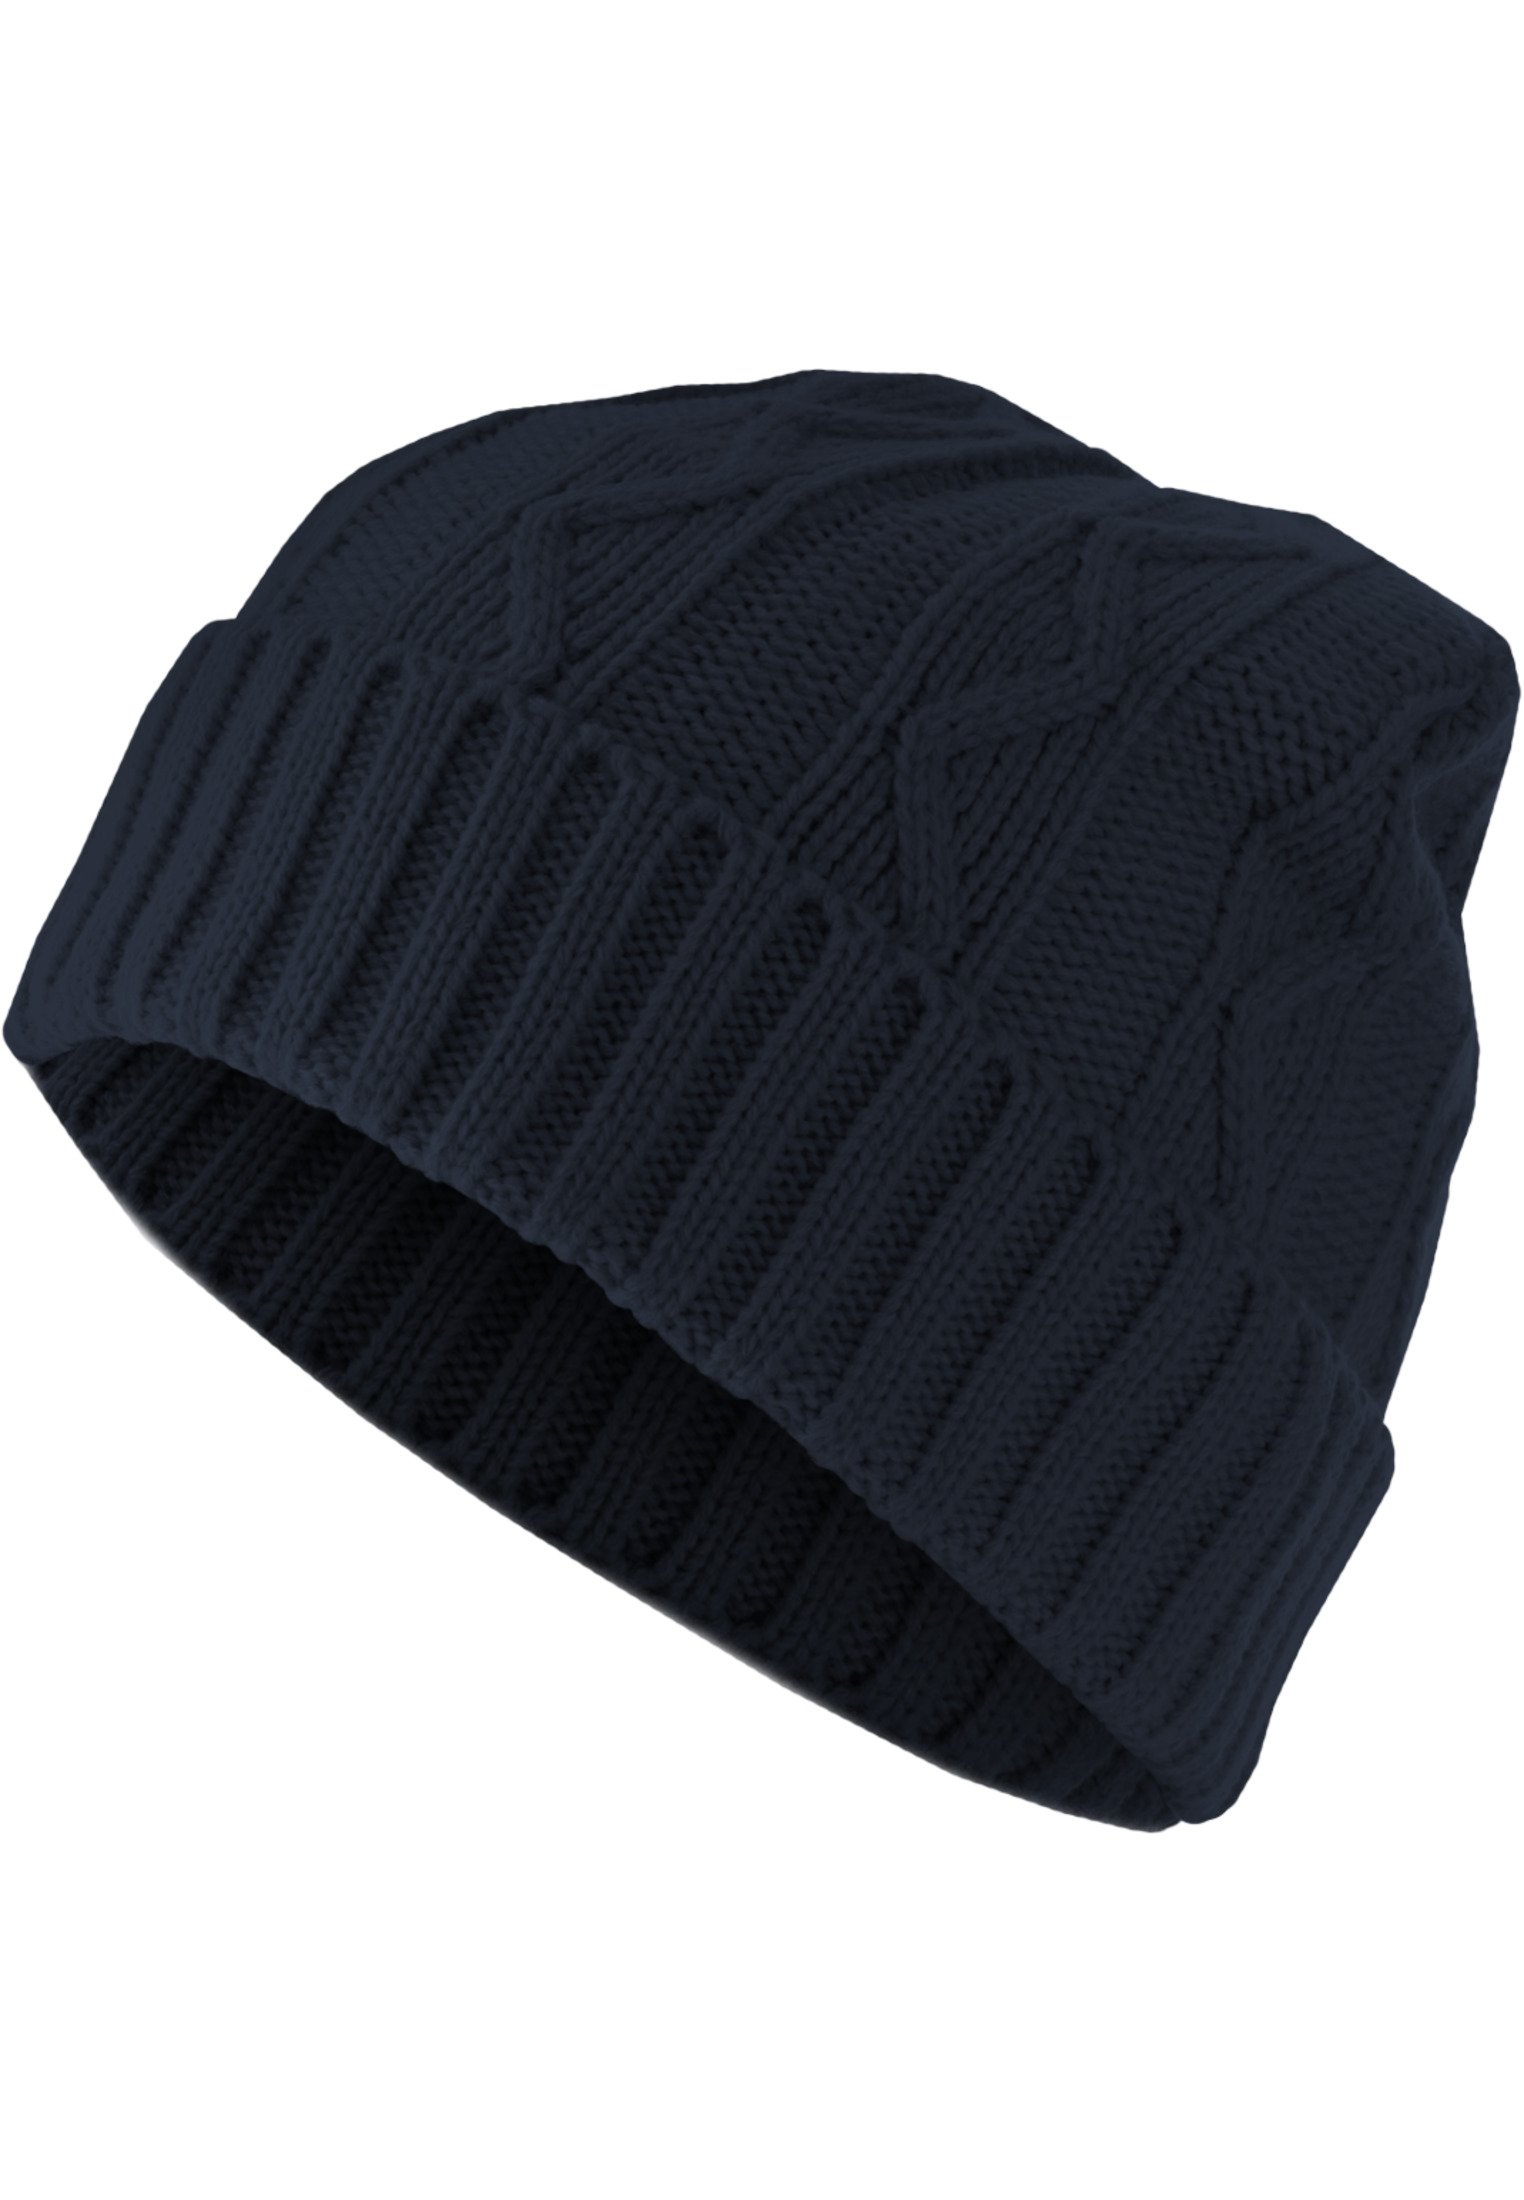 Beanie Cable Flap navy one size